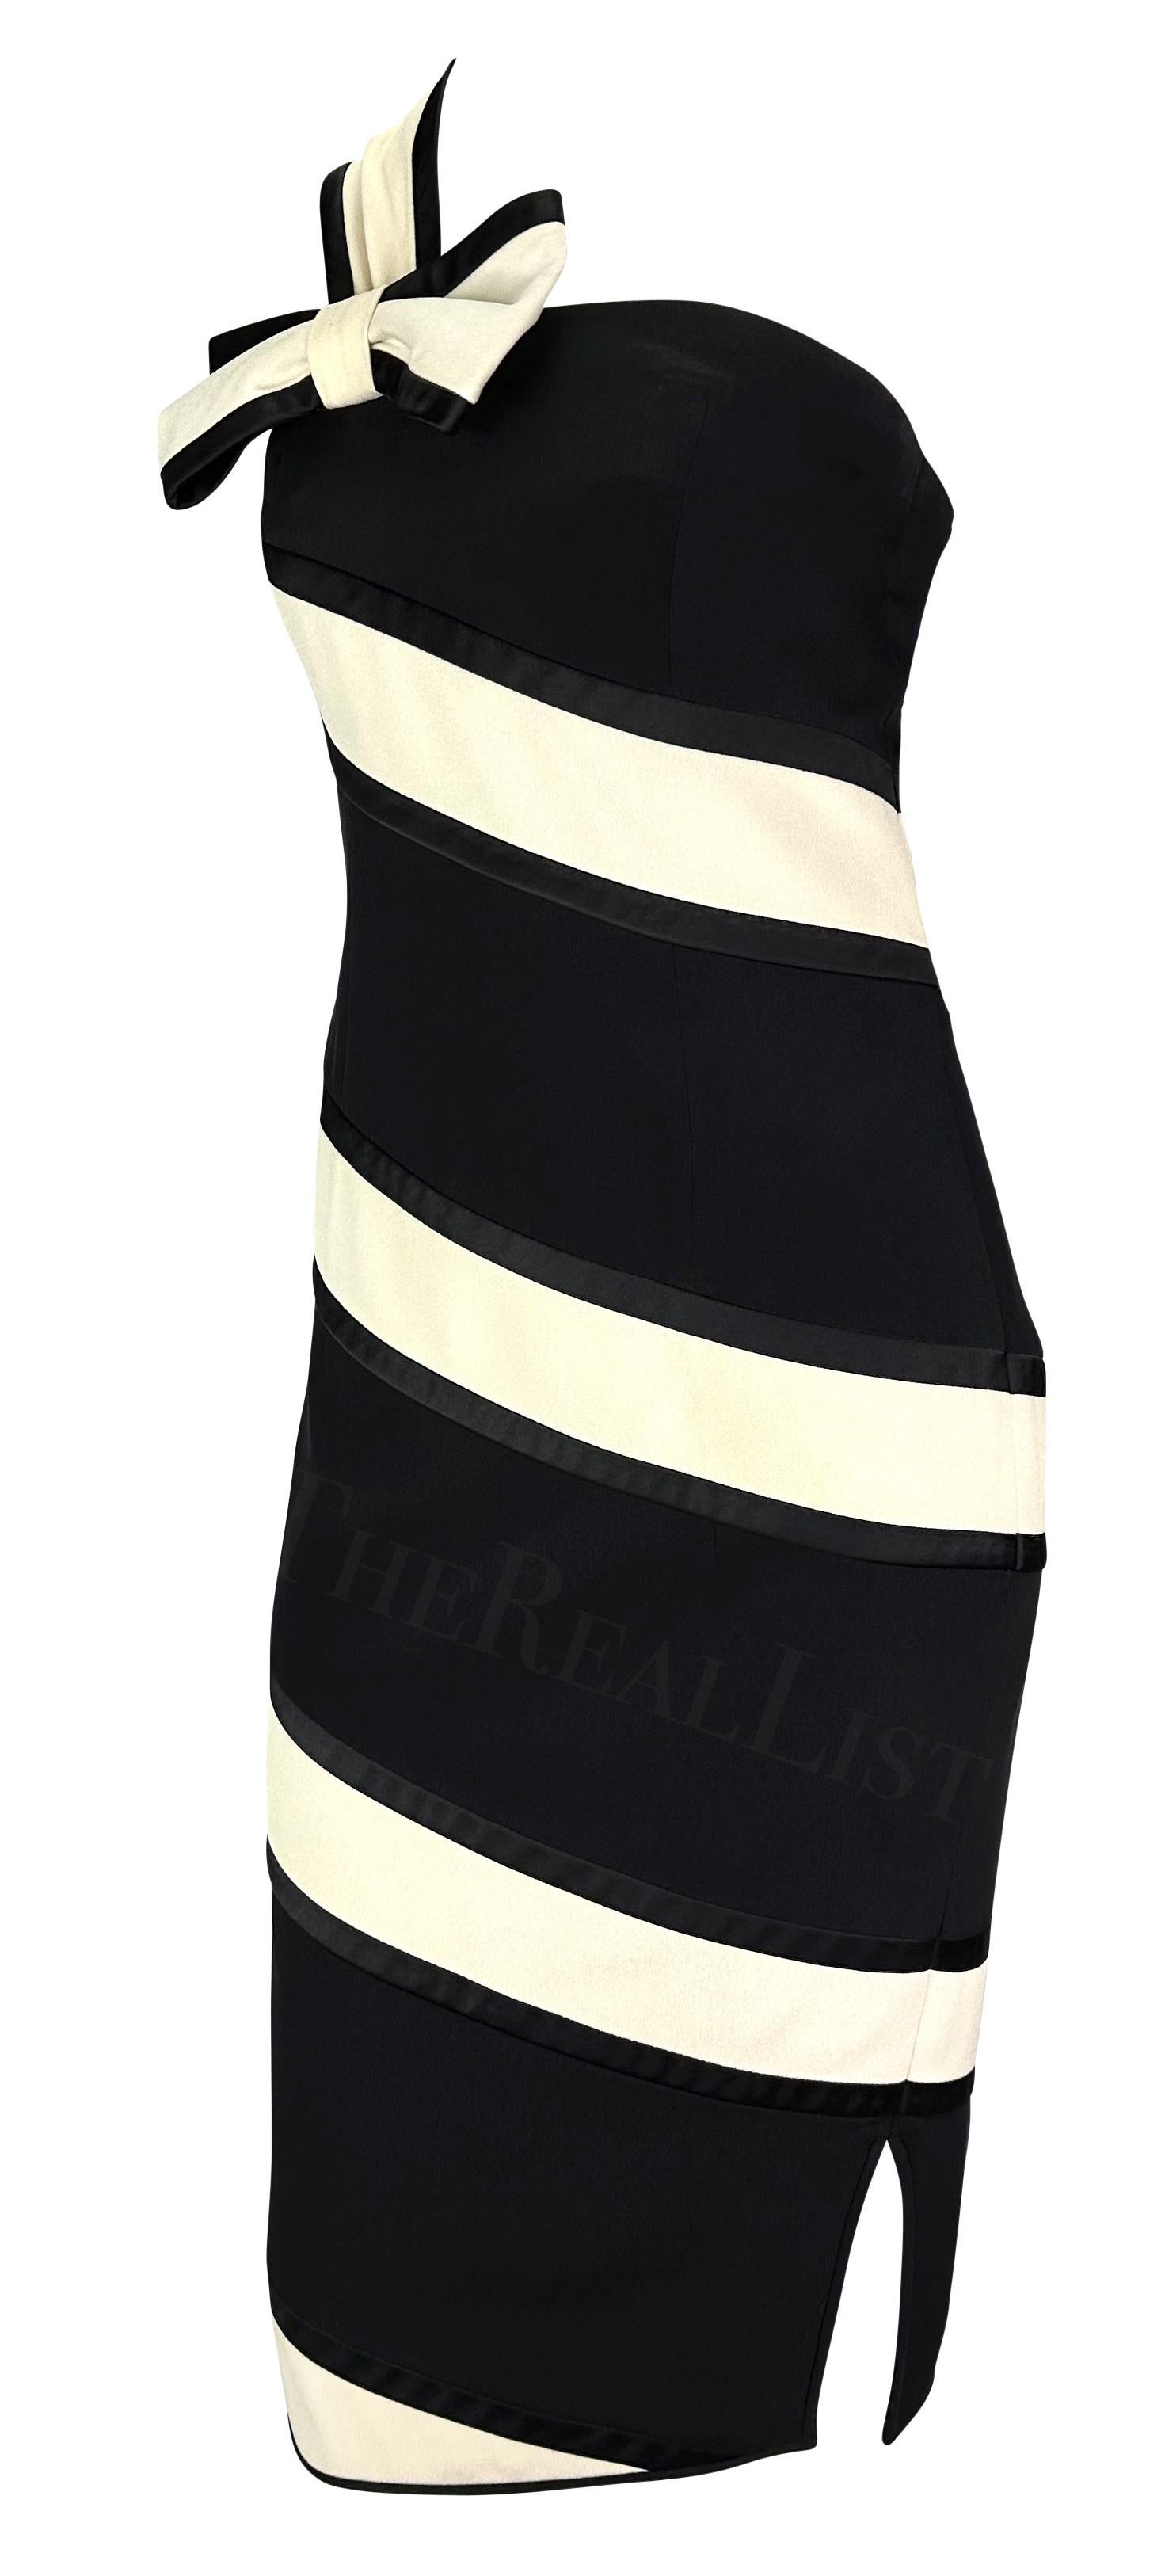 S/S 1993 Valentino Garavani Runway Black White Stripe Bow Dress In Excellent Condition For Sale In West Hollywood, CA